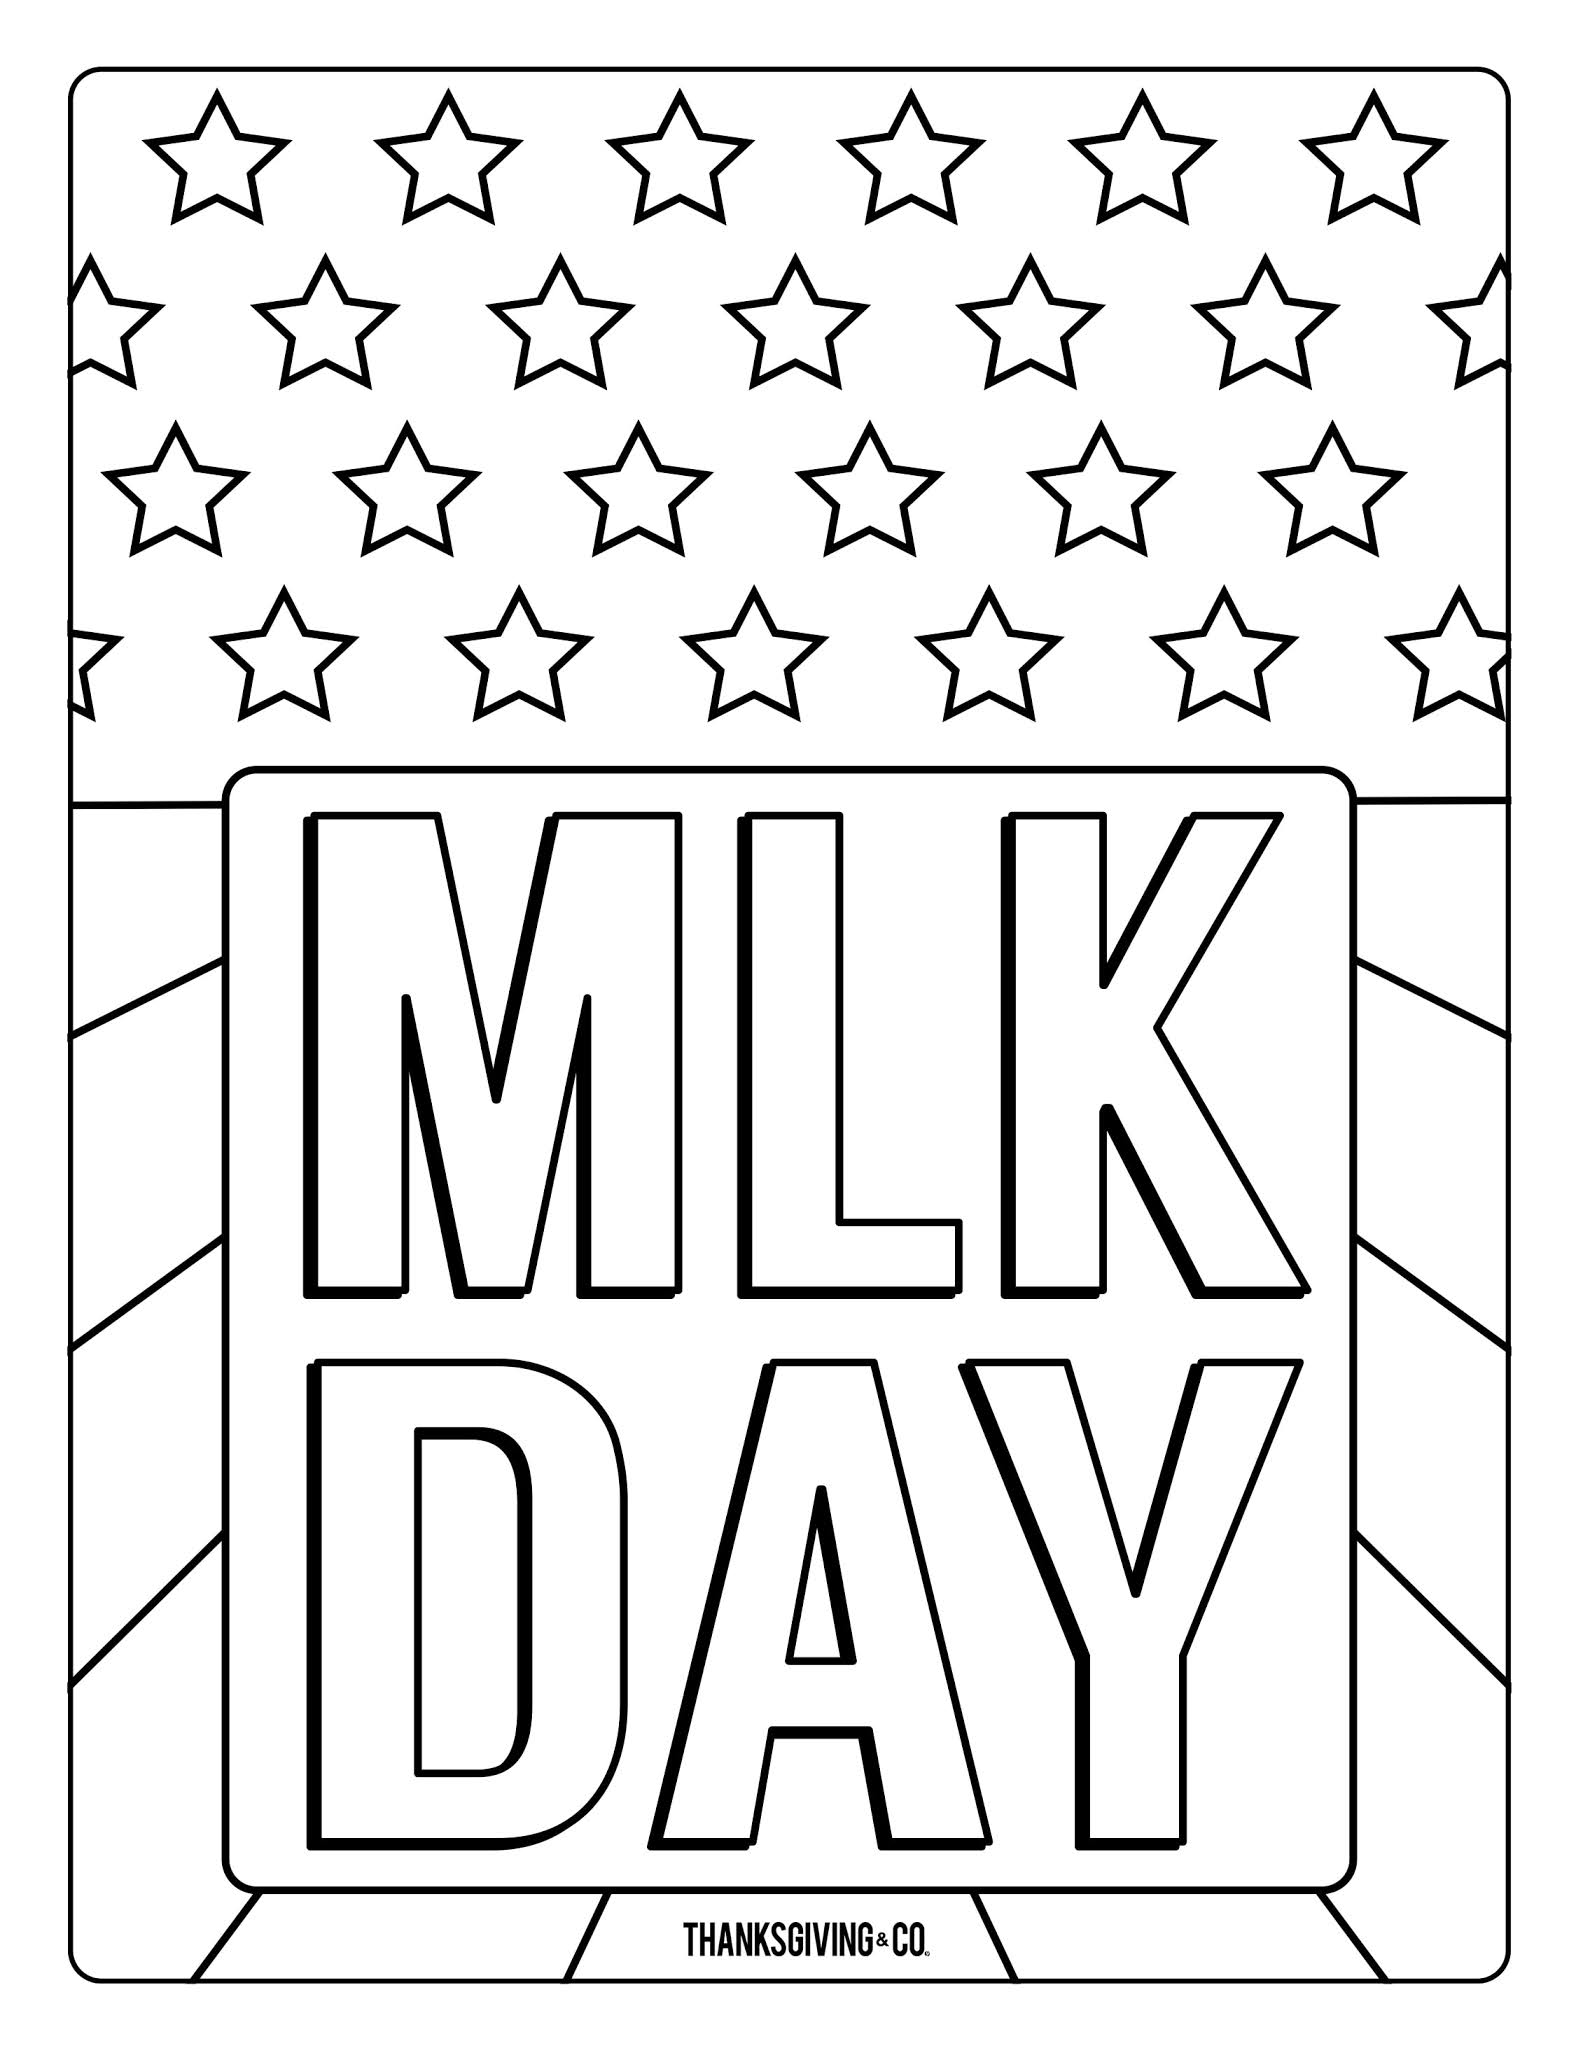 Martin Luther King Coloring Pages 2 ~ Coloring Pages